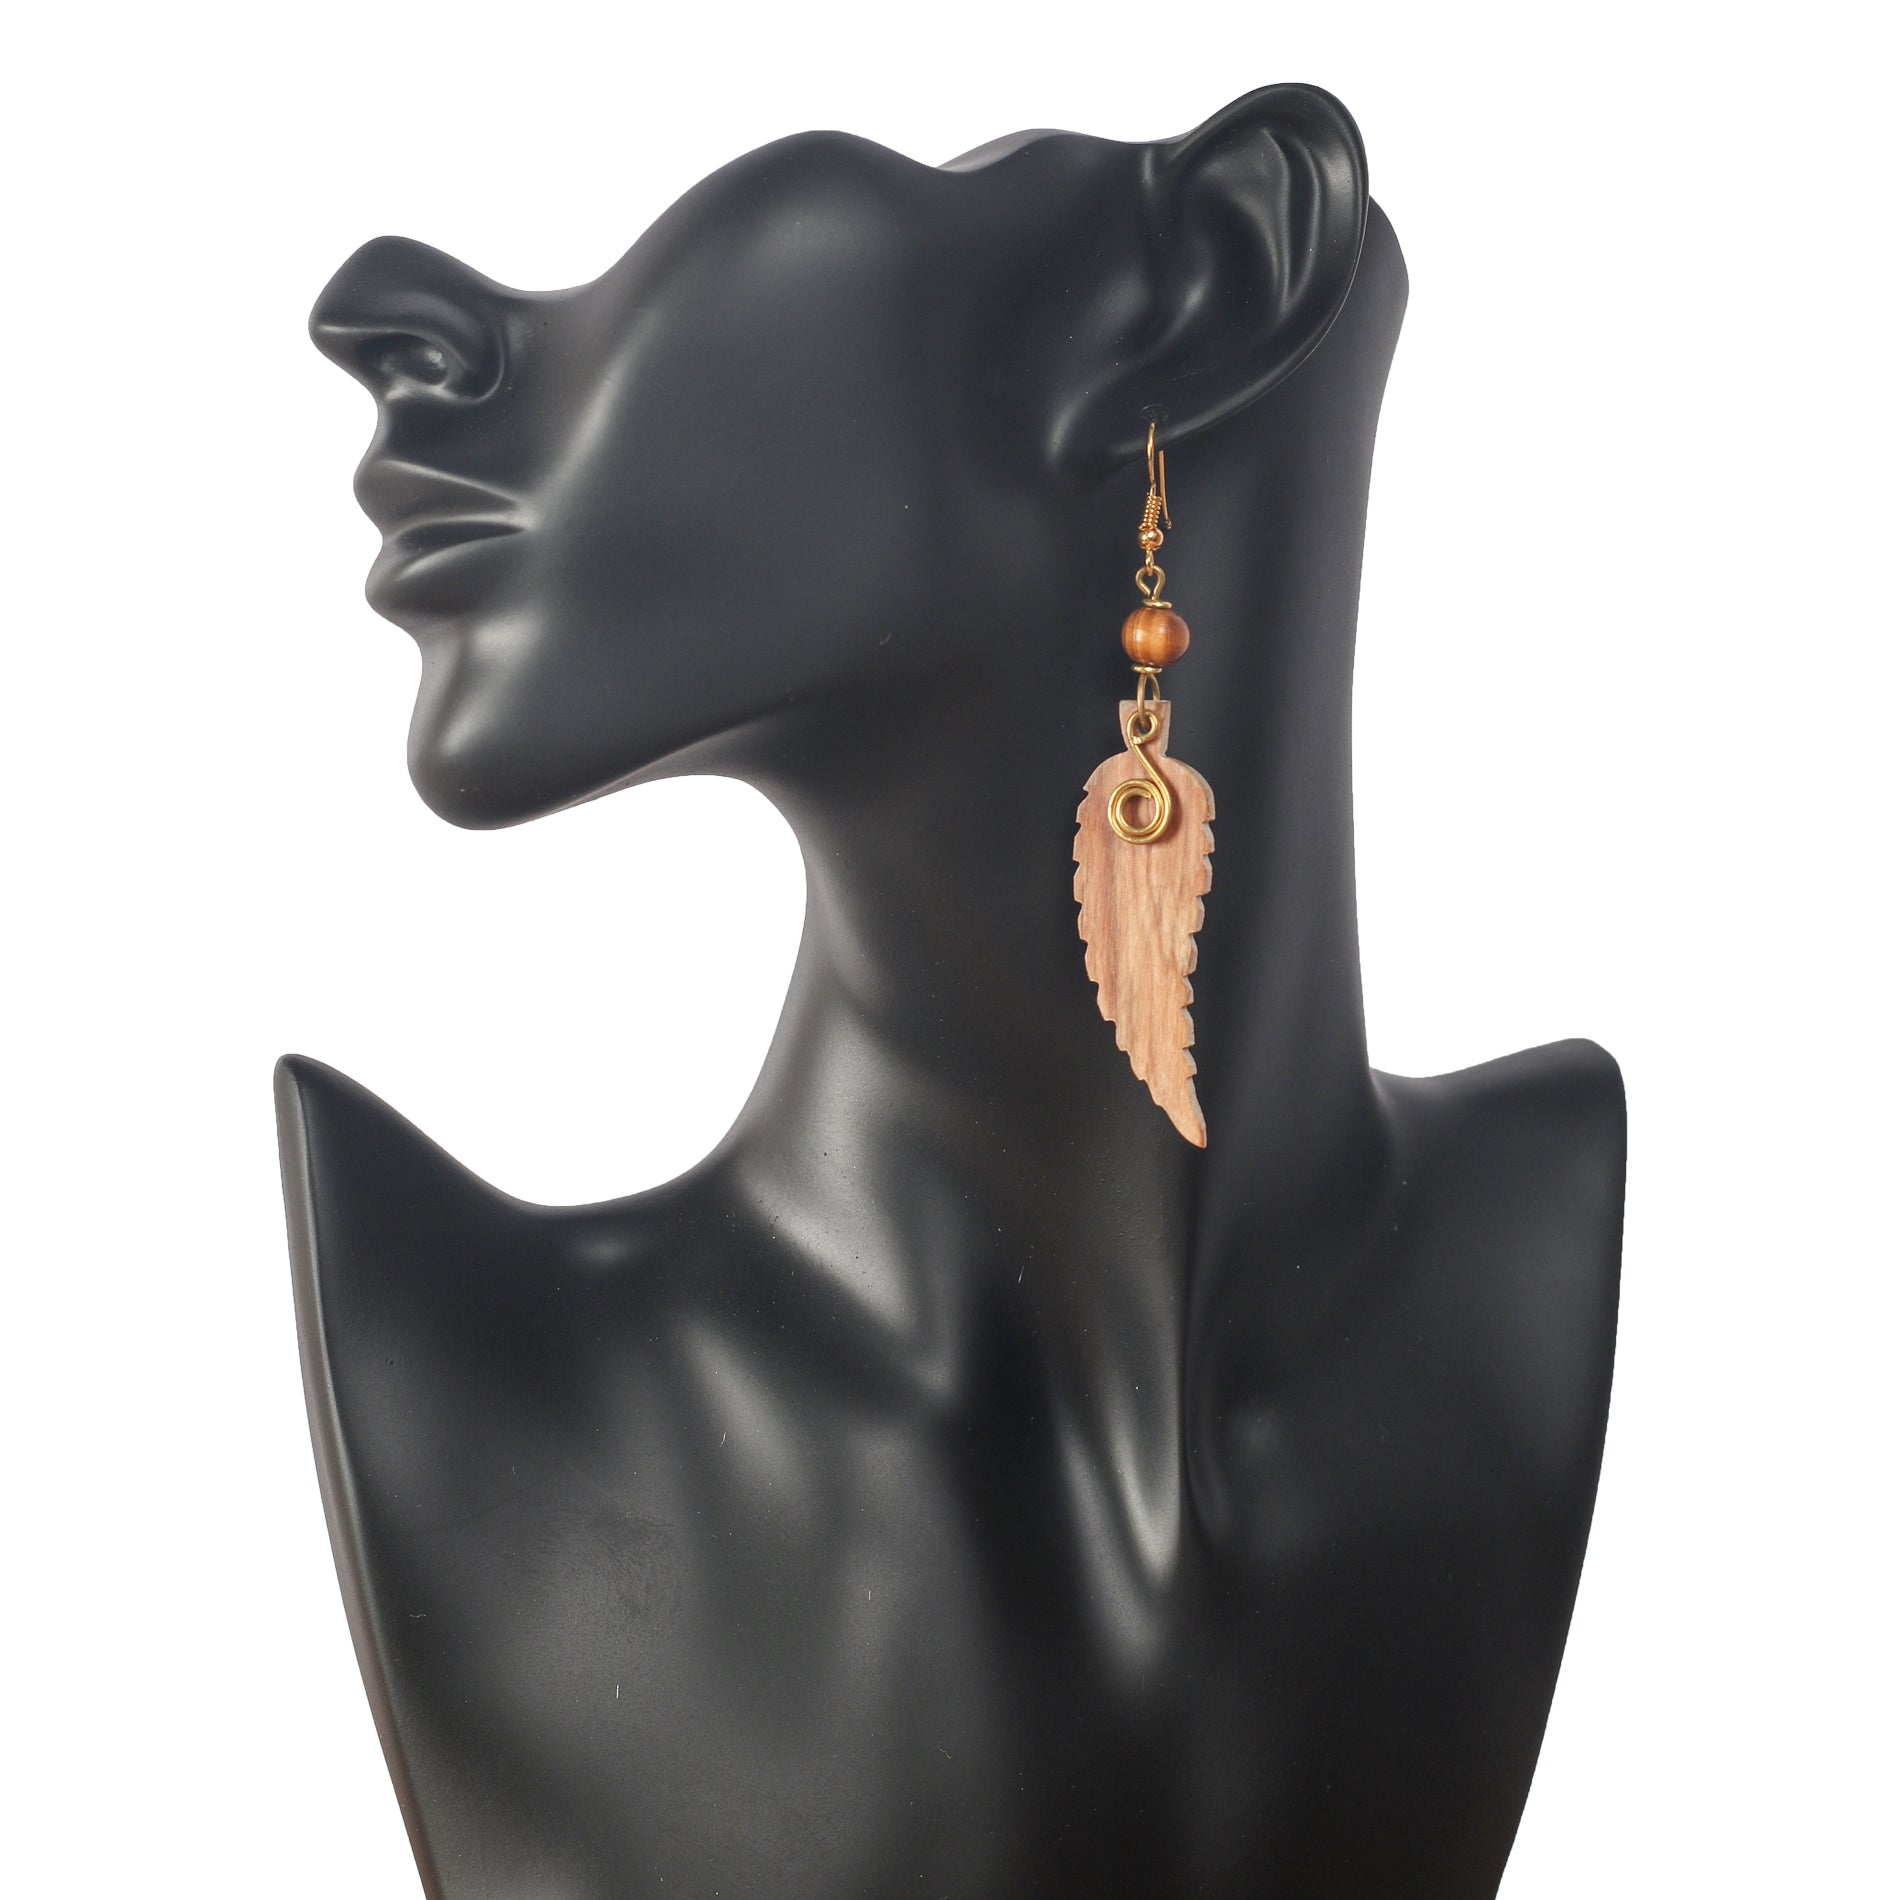 Long Wooden Earrings with a brown bead and gold plated brass accent.